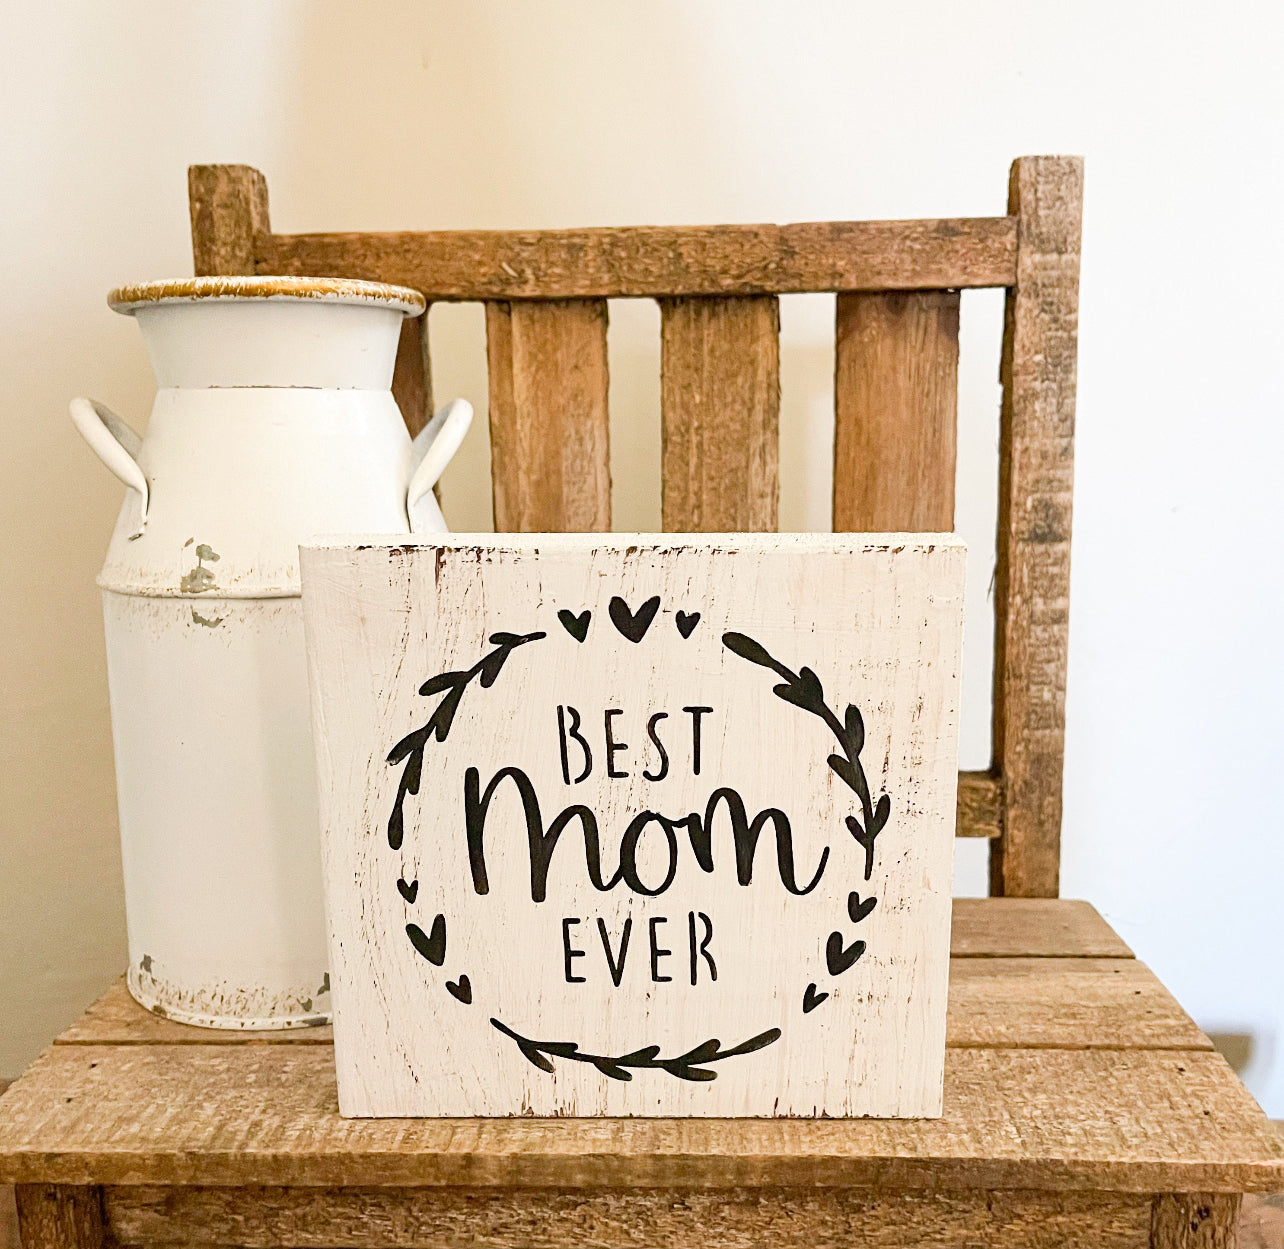 Best Mom Ever Wood Sign